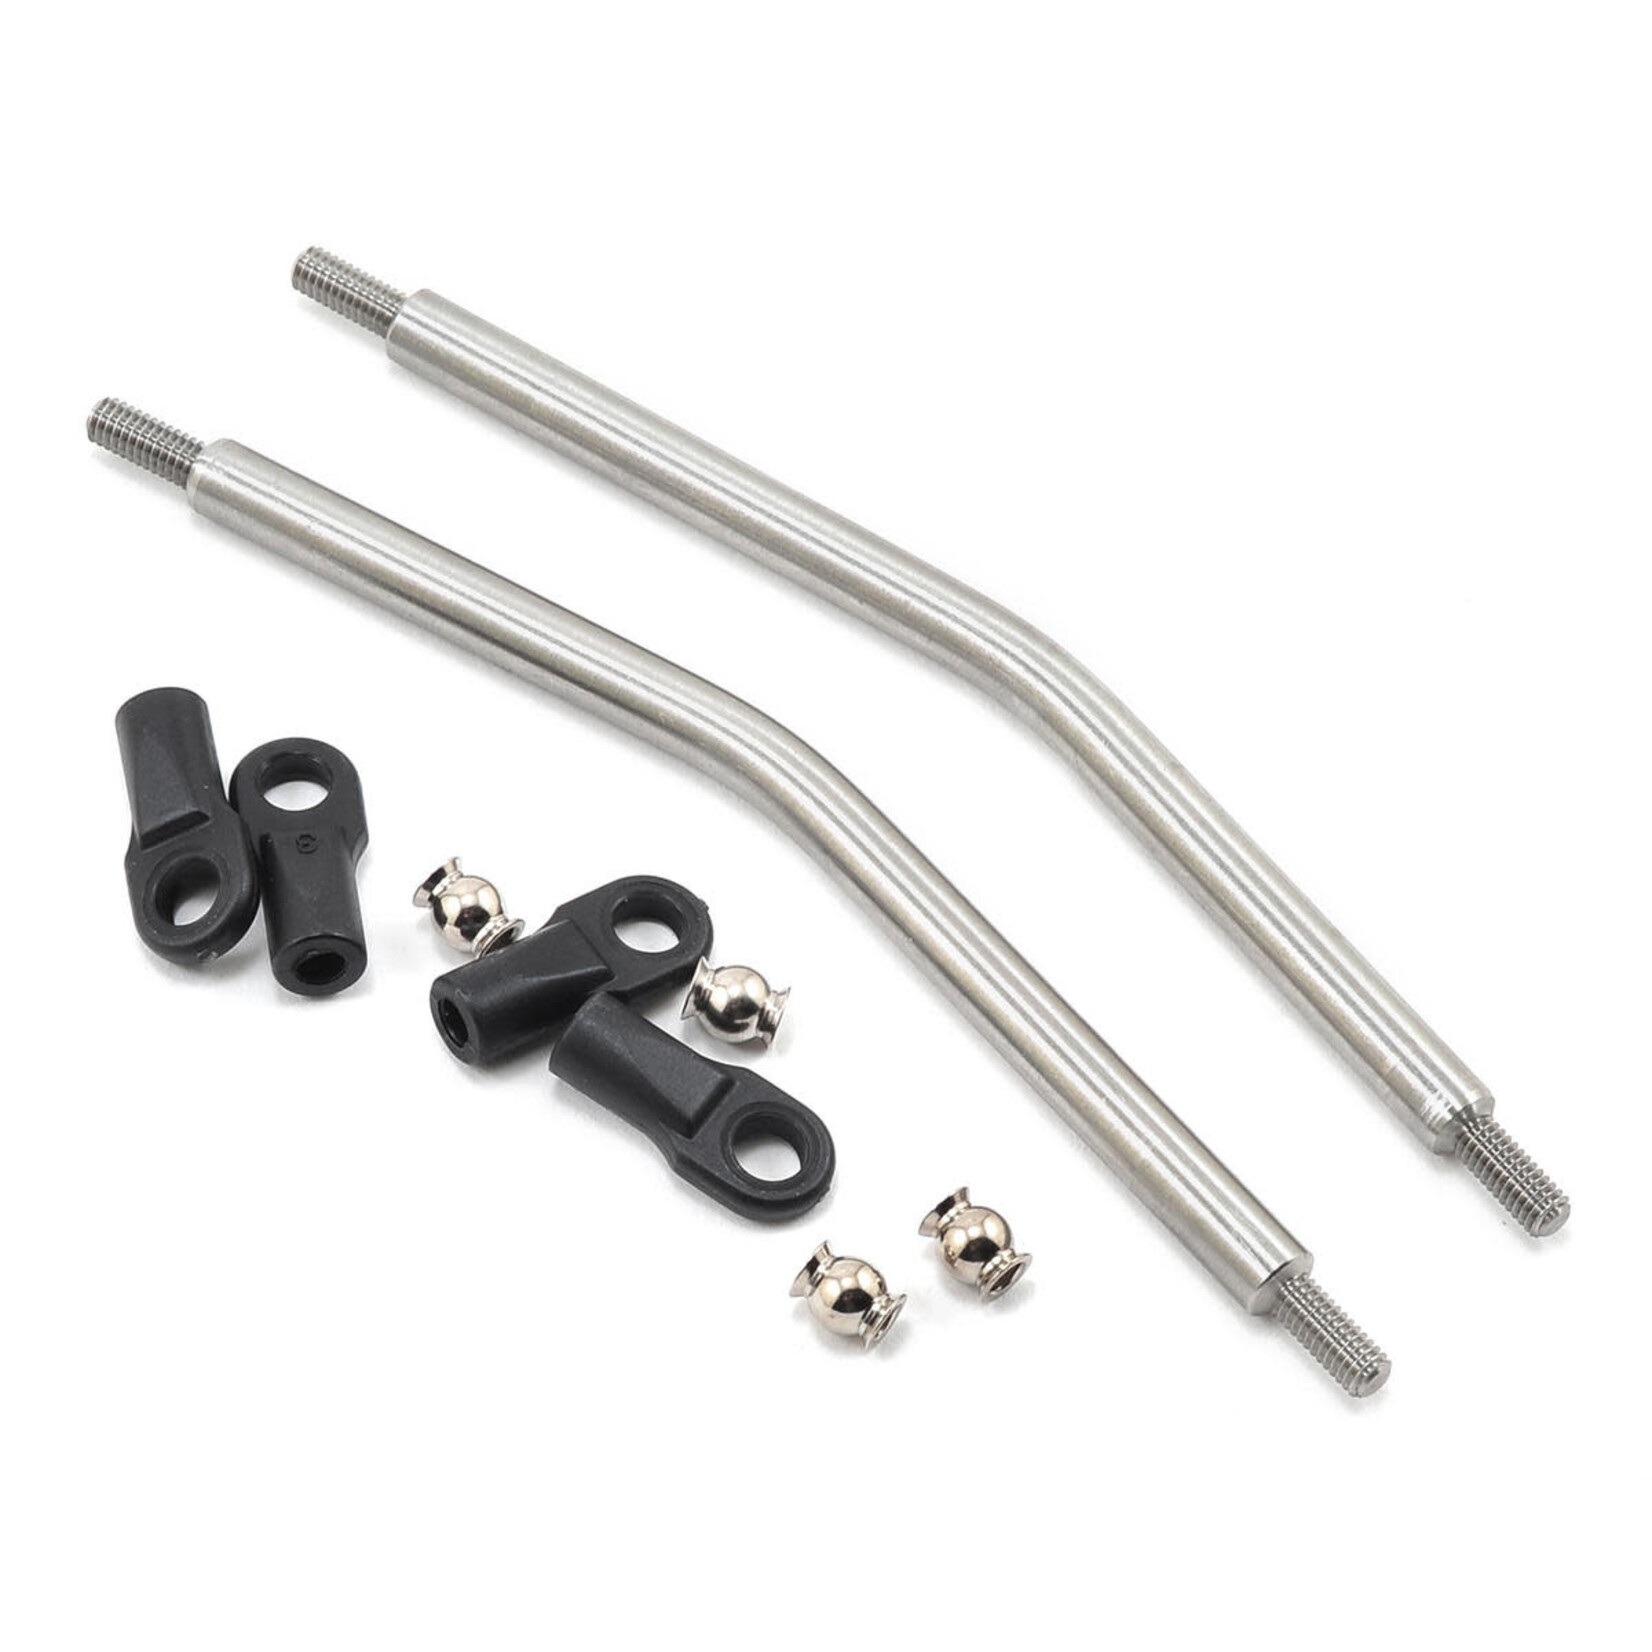 Incision Incision Yeti 1/4 Stainless Steel Rear Upper Suspension Links (2) #IRC0051